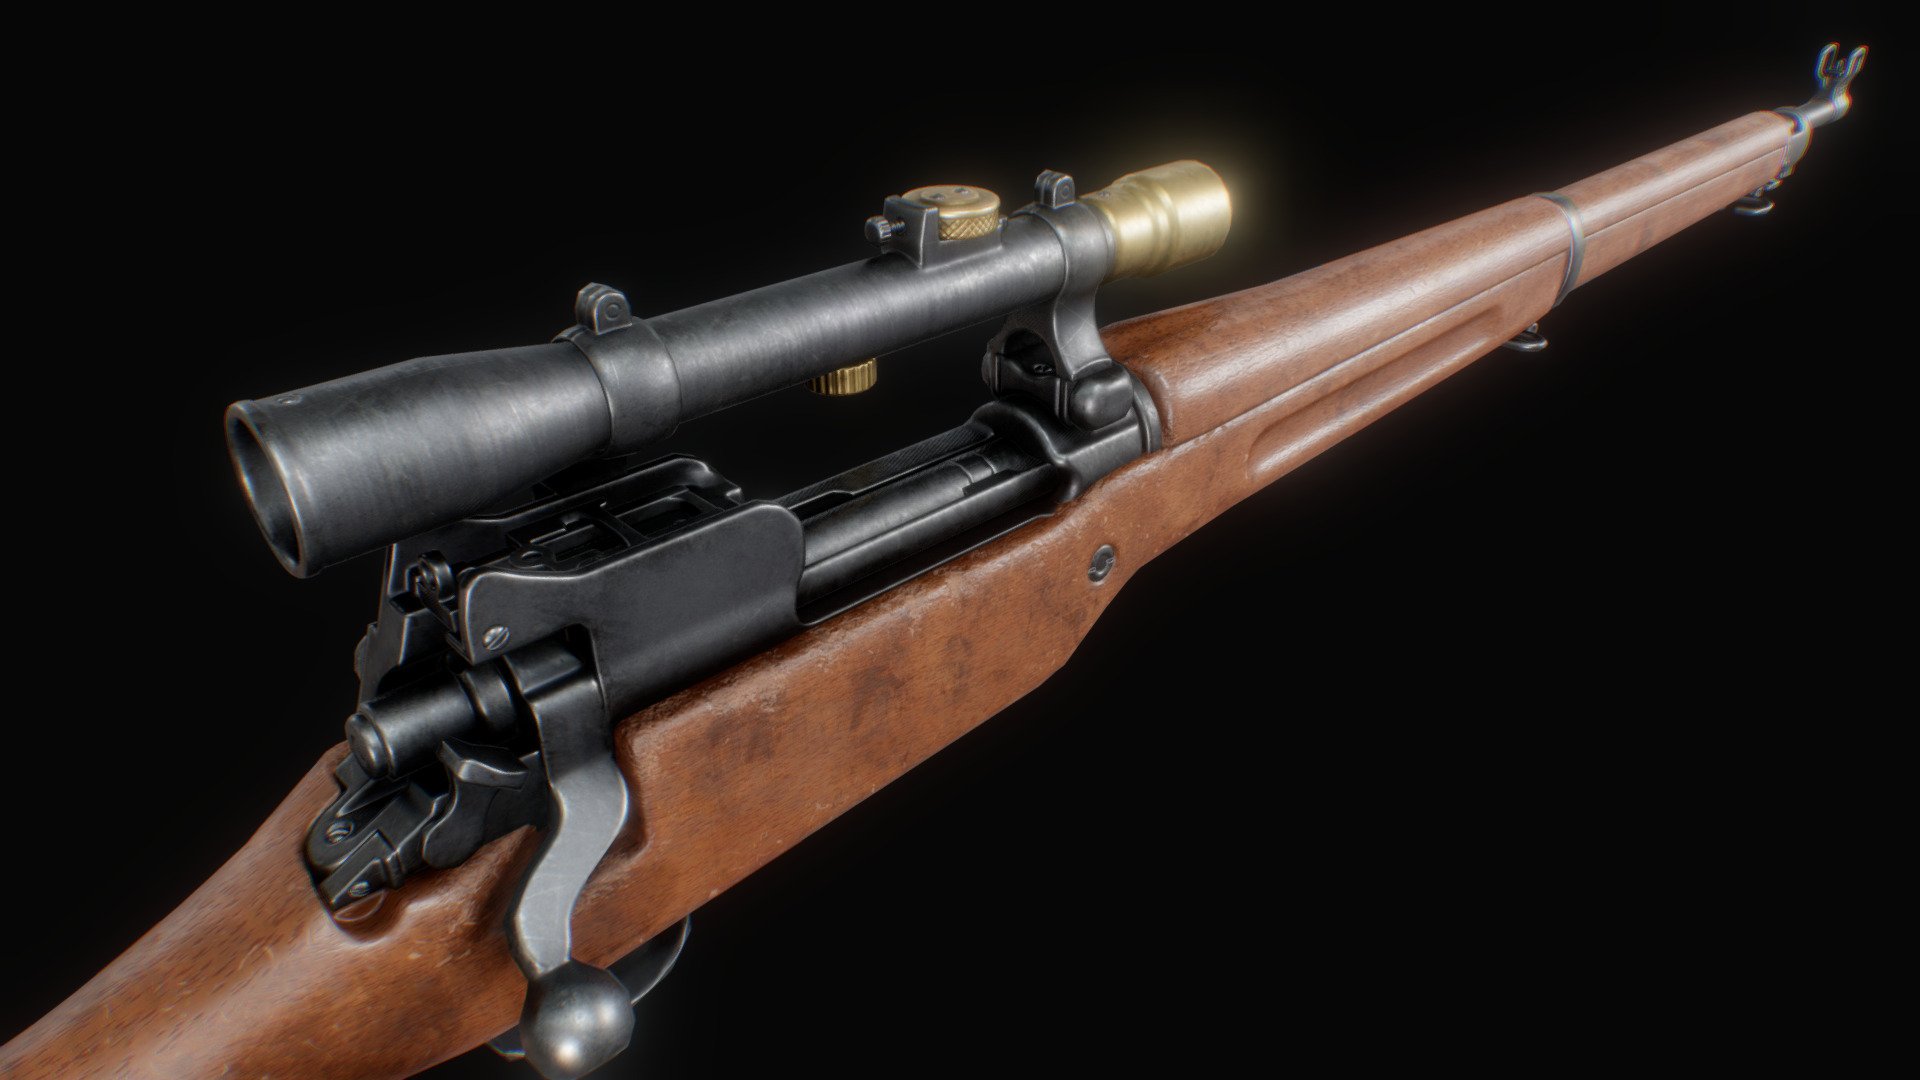 The British P14 fitted with a Sniper Scope.

High Poly by Red Rogue (https://www.artstation.com/redroguexiii)
Low Poly and Texture by me.
Heavily optimized for First Person only.

WIP for a Rising Storm 2 mod 3d model